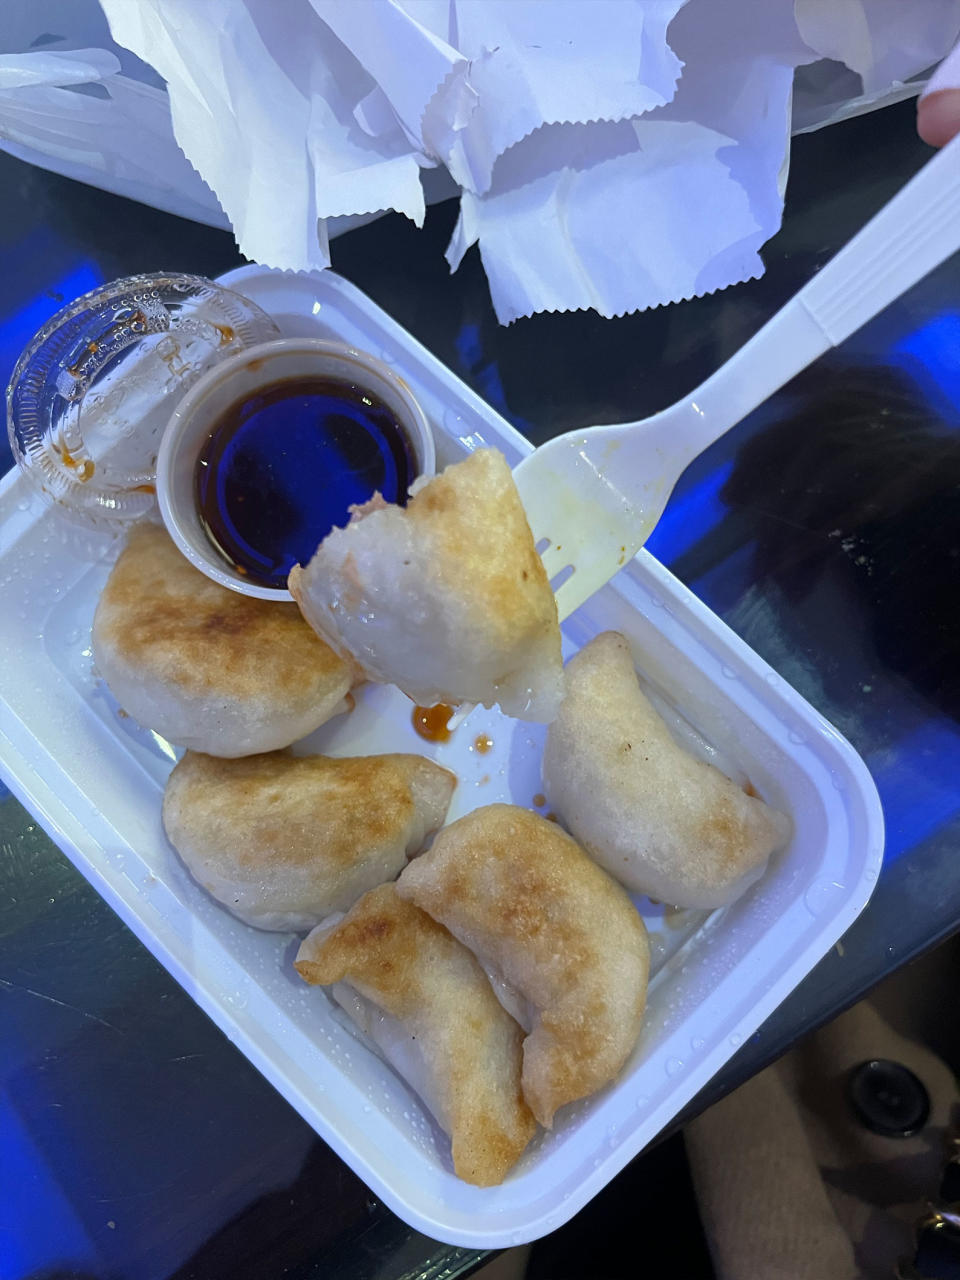 Pan Fried Dumplings from Lilli and Loo in NYC